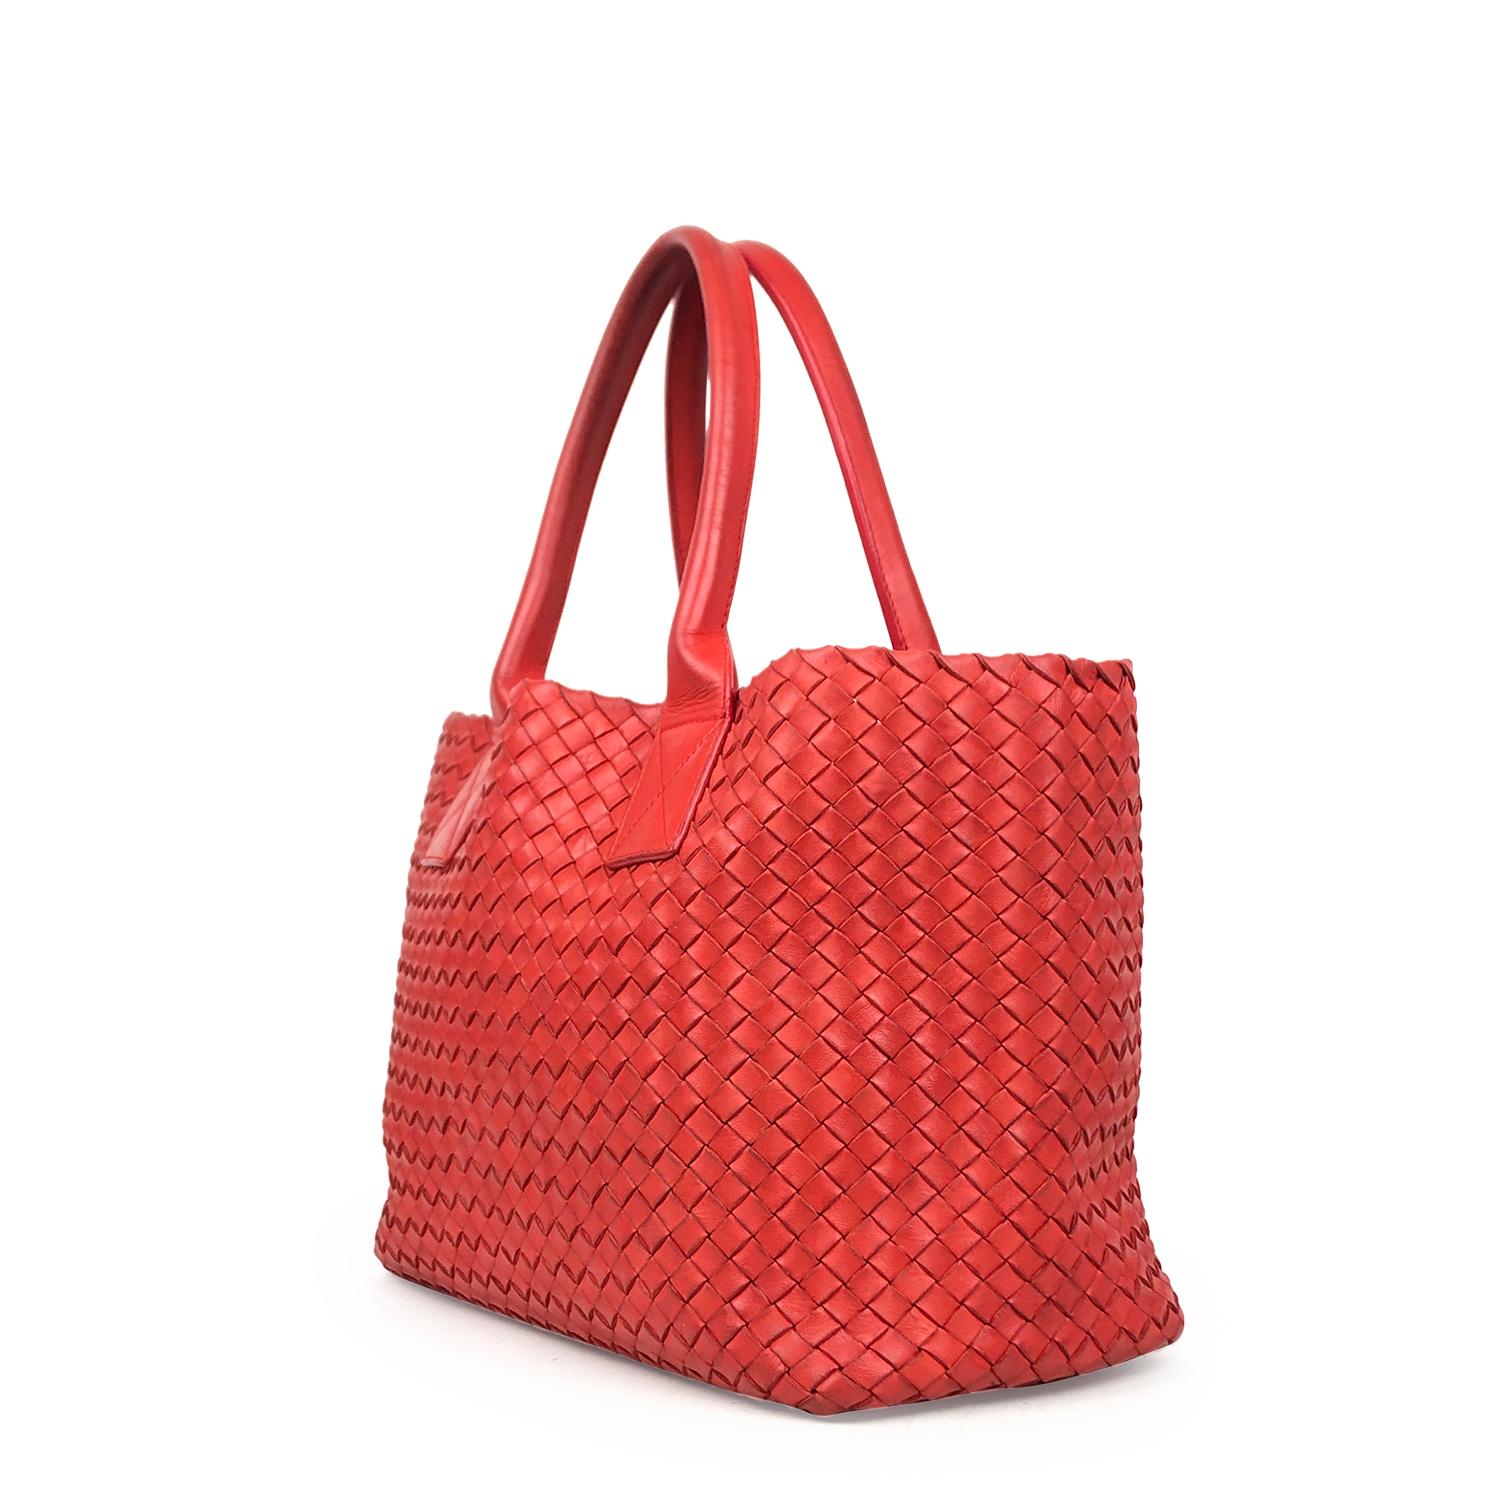 Red Intrecciato leather Bottega Veneta Small Cabat tote with

– Gold-tone hardware
– Dual flat shoulder straps
– Tonal interior and open top

Overall Preloved Condition: Good

Exterior Condition: Good. Leather is slightly dirty and scratched